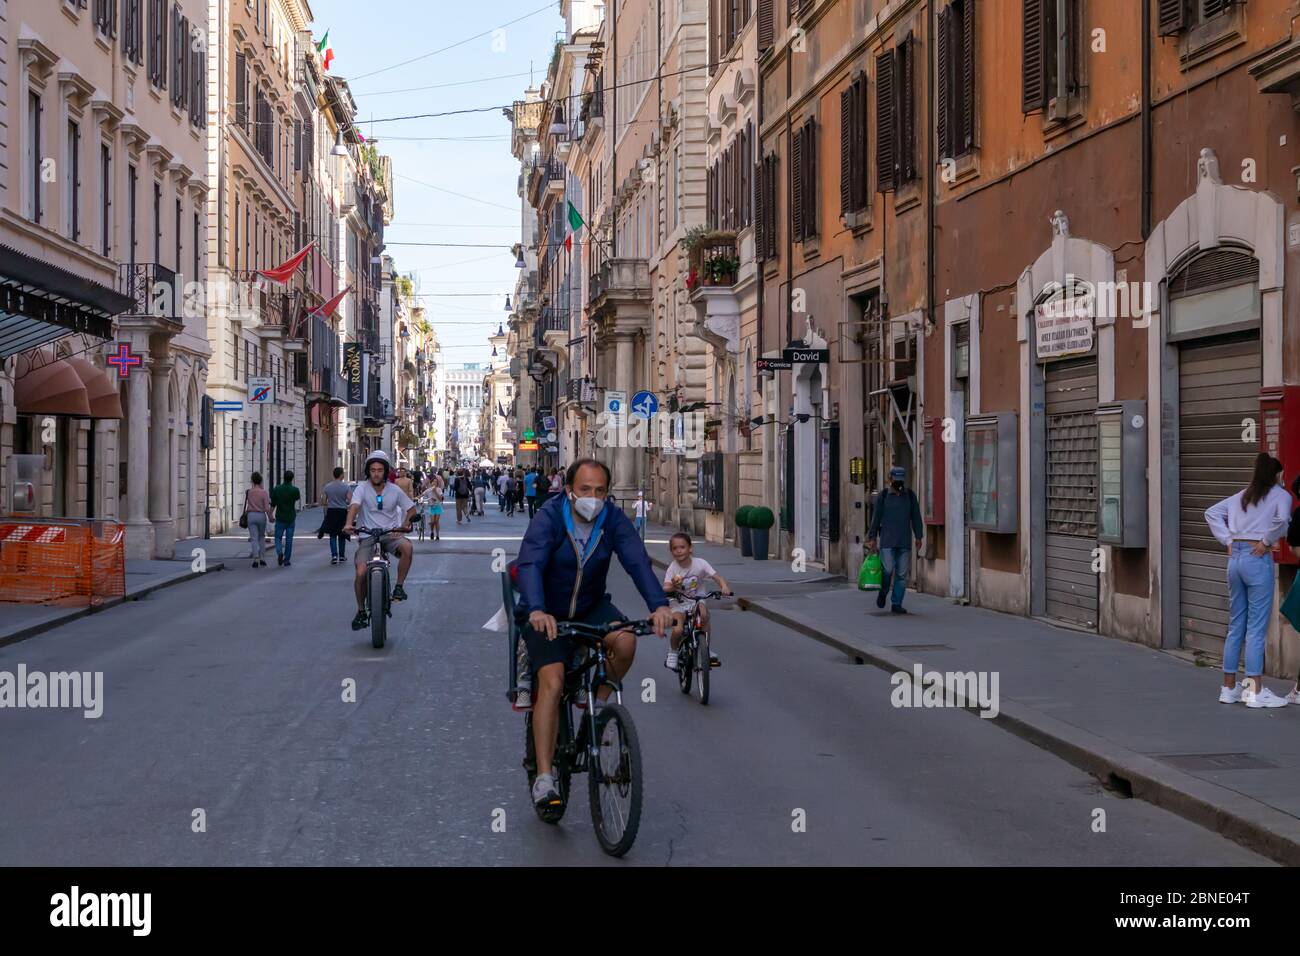 Rome, Italy - May 10, 2020: Via del Corso, first exit of citizens after the end of the restrictions for the Covid-19 pandemic. People stroll on the st Stock Photo